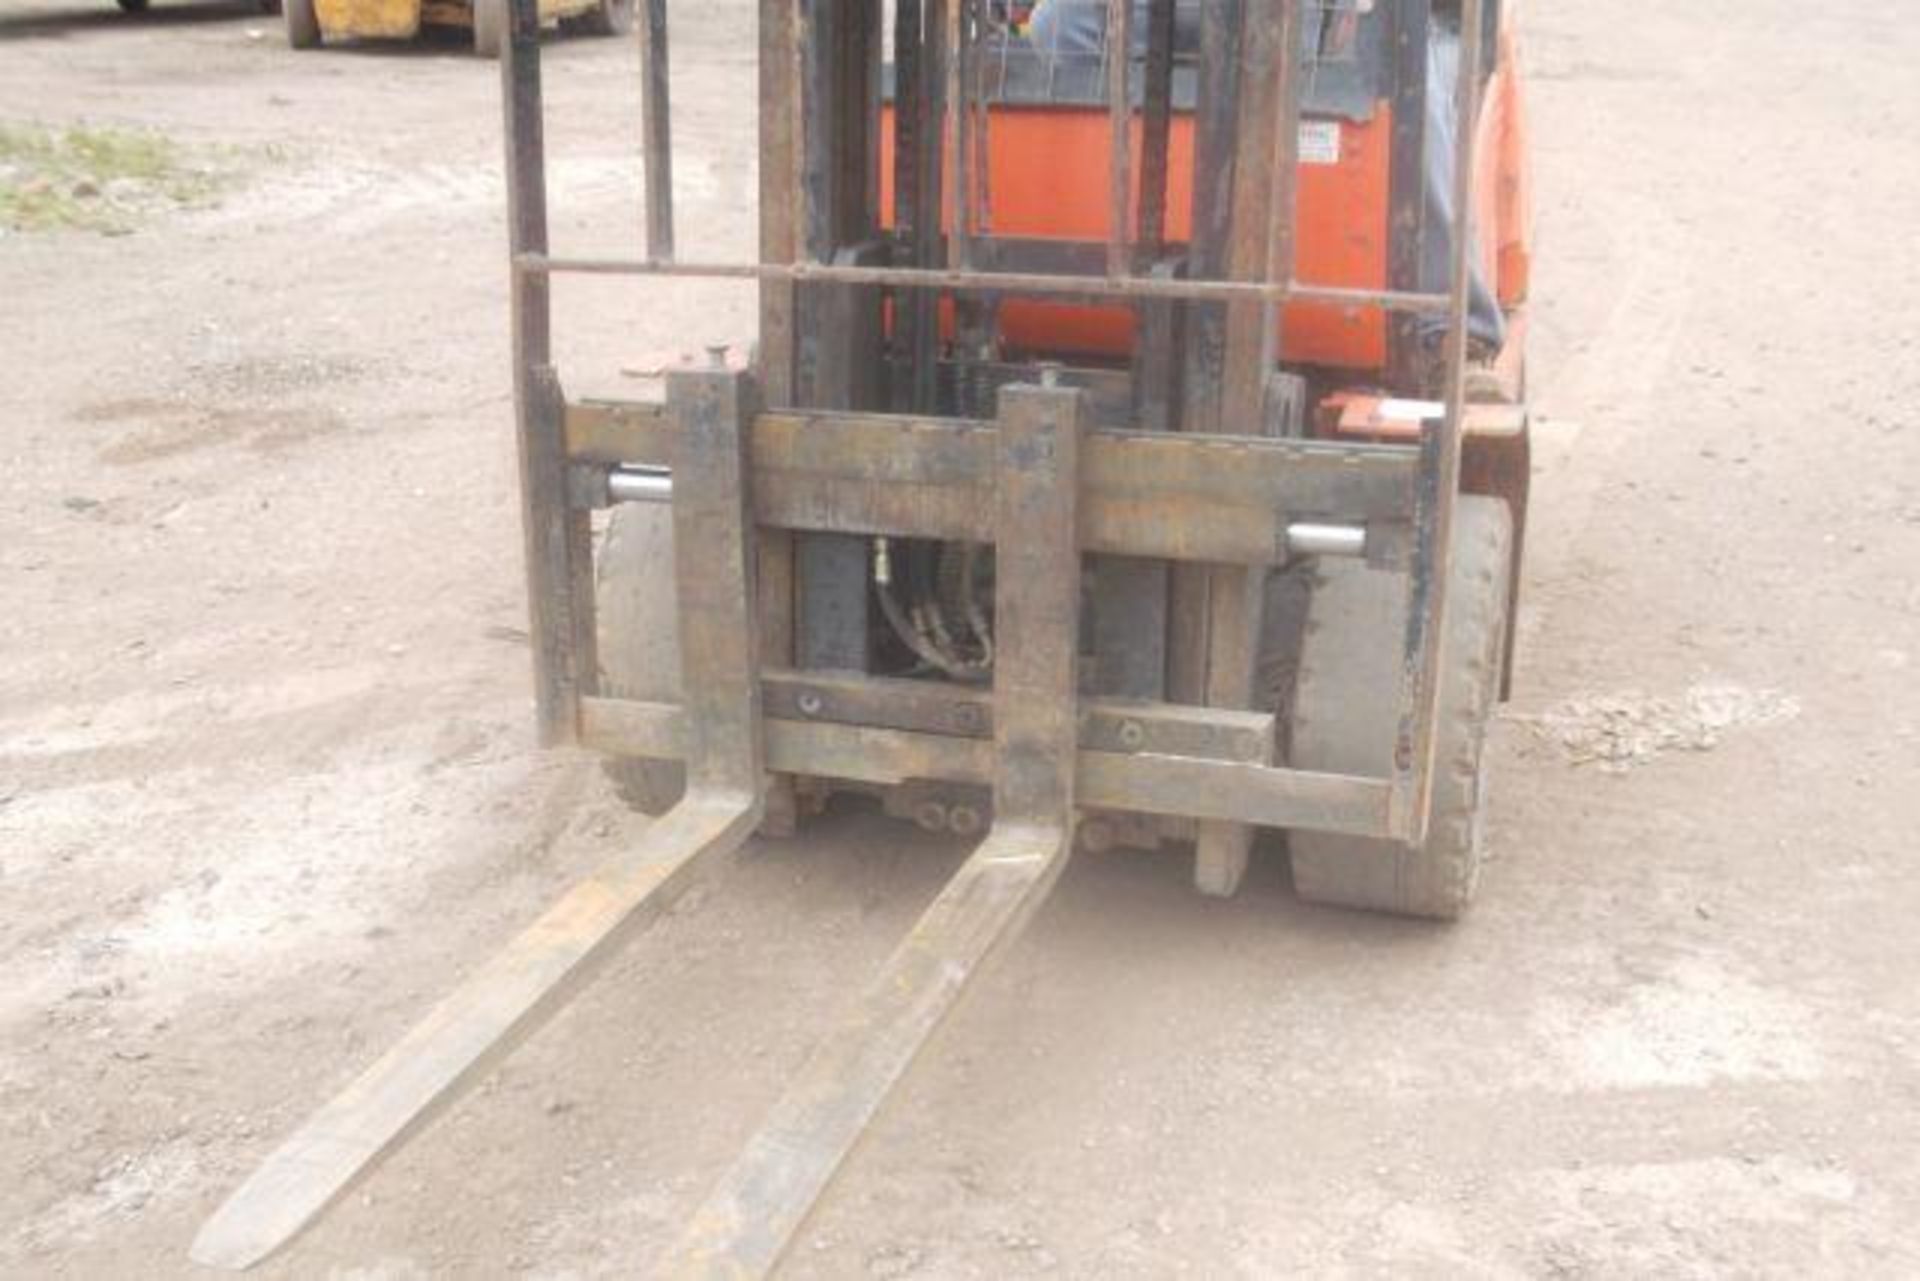 * Boss CD30D Diesel Forklift With Side Shift, Lift Height 4m, Solid Tyres, Perkins Engine, Runner. - Image 3 of 3